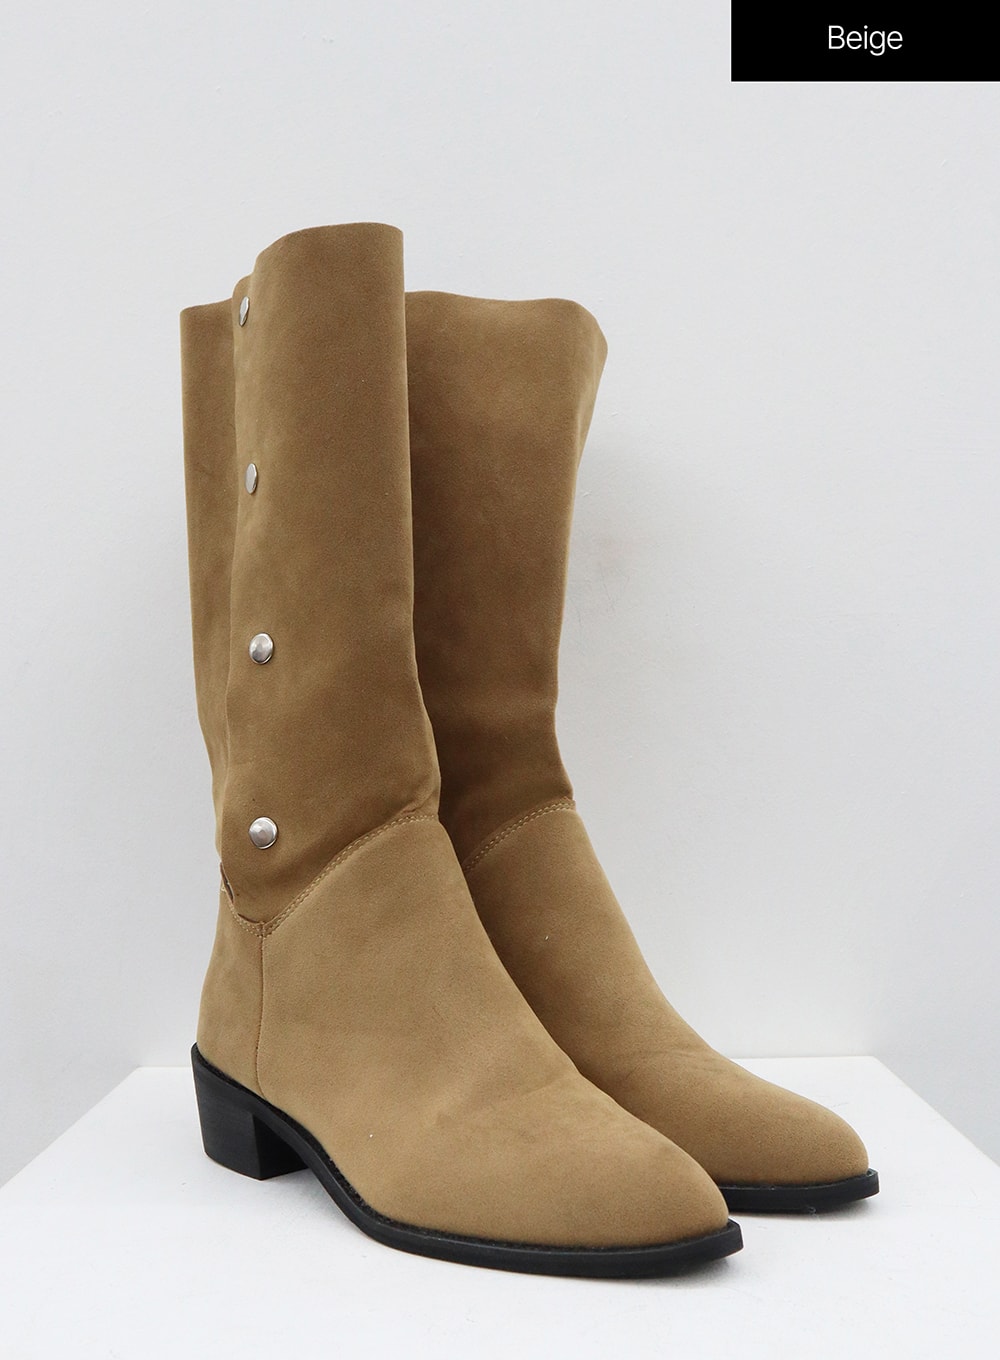 Pointed Toe Button Mid-Calf Boots ON17